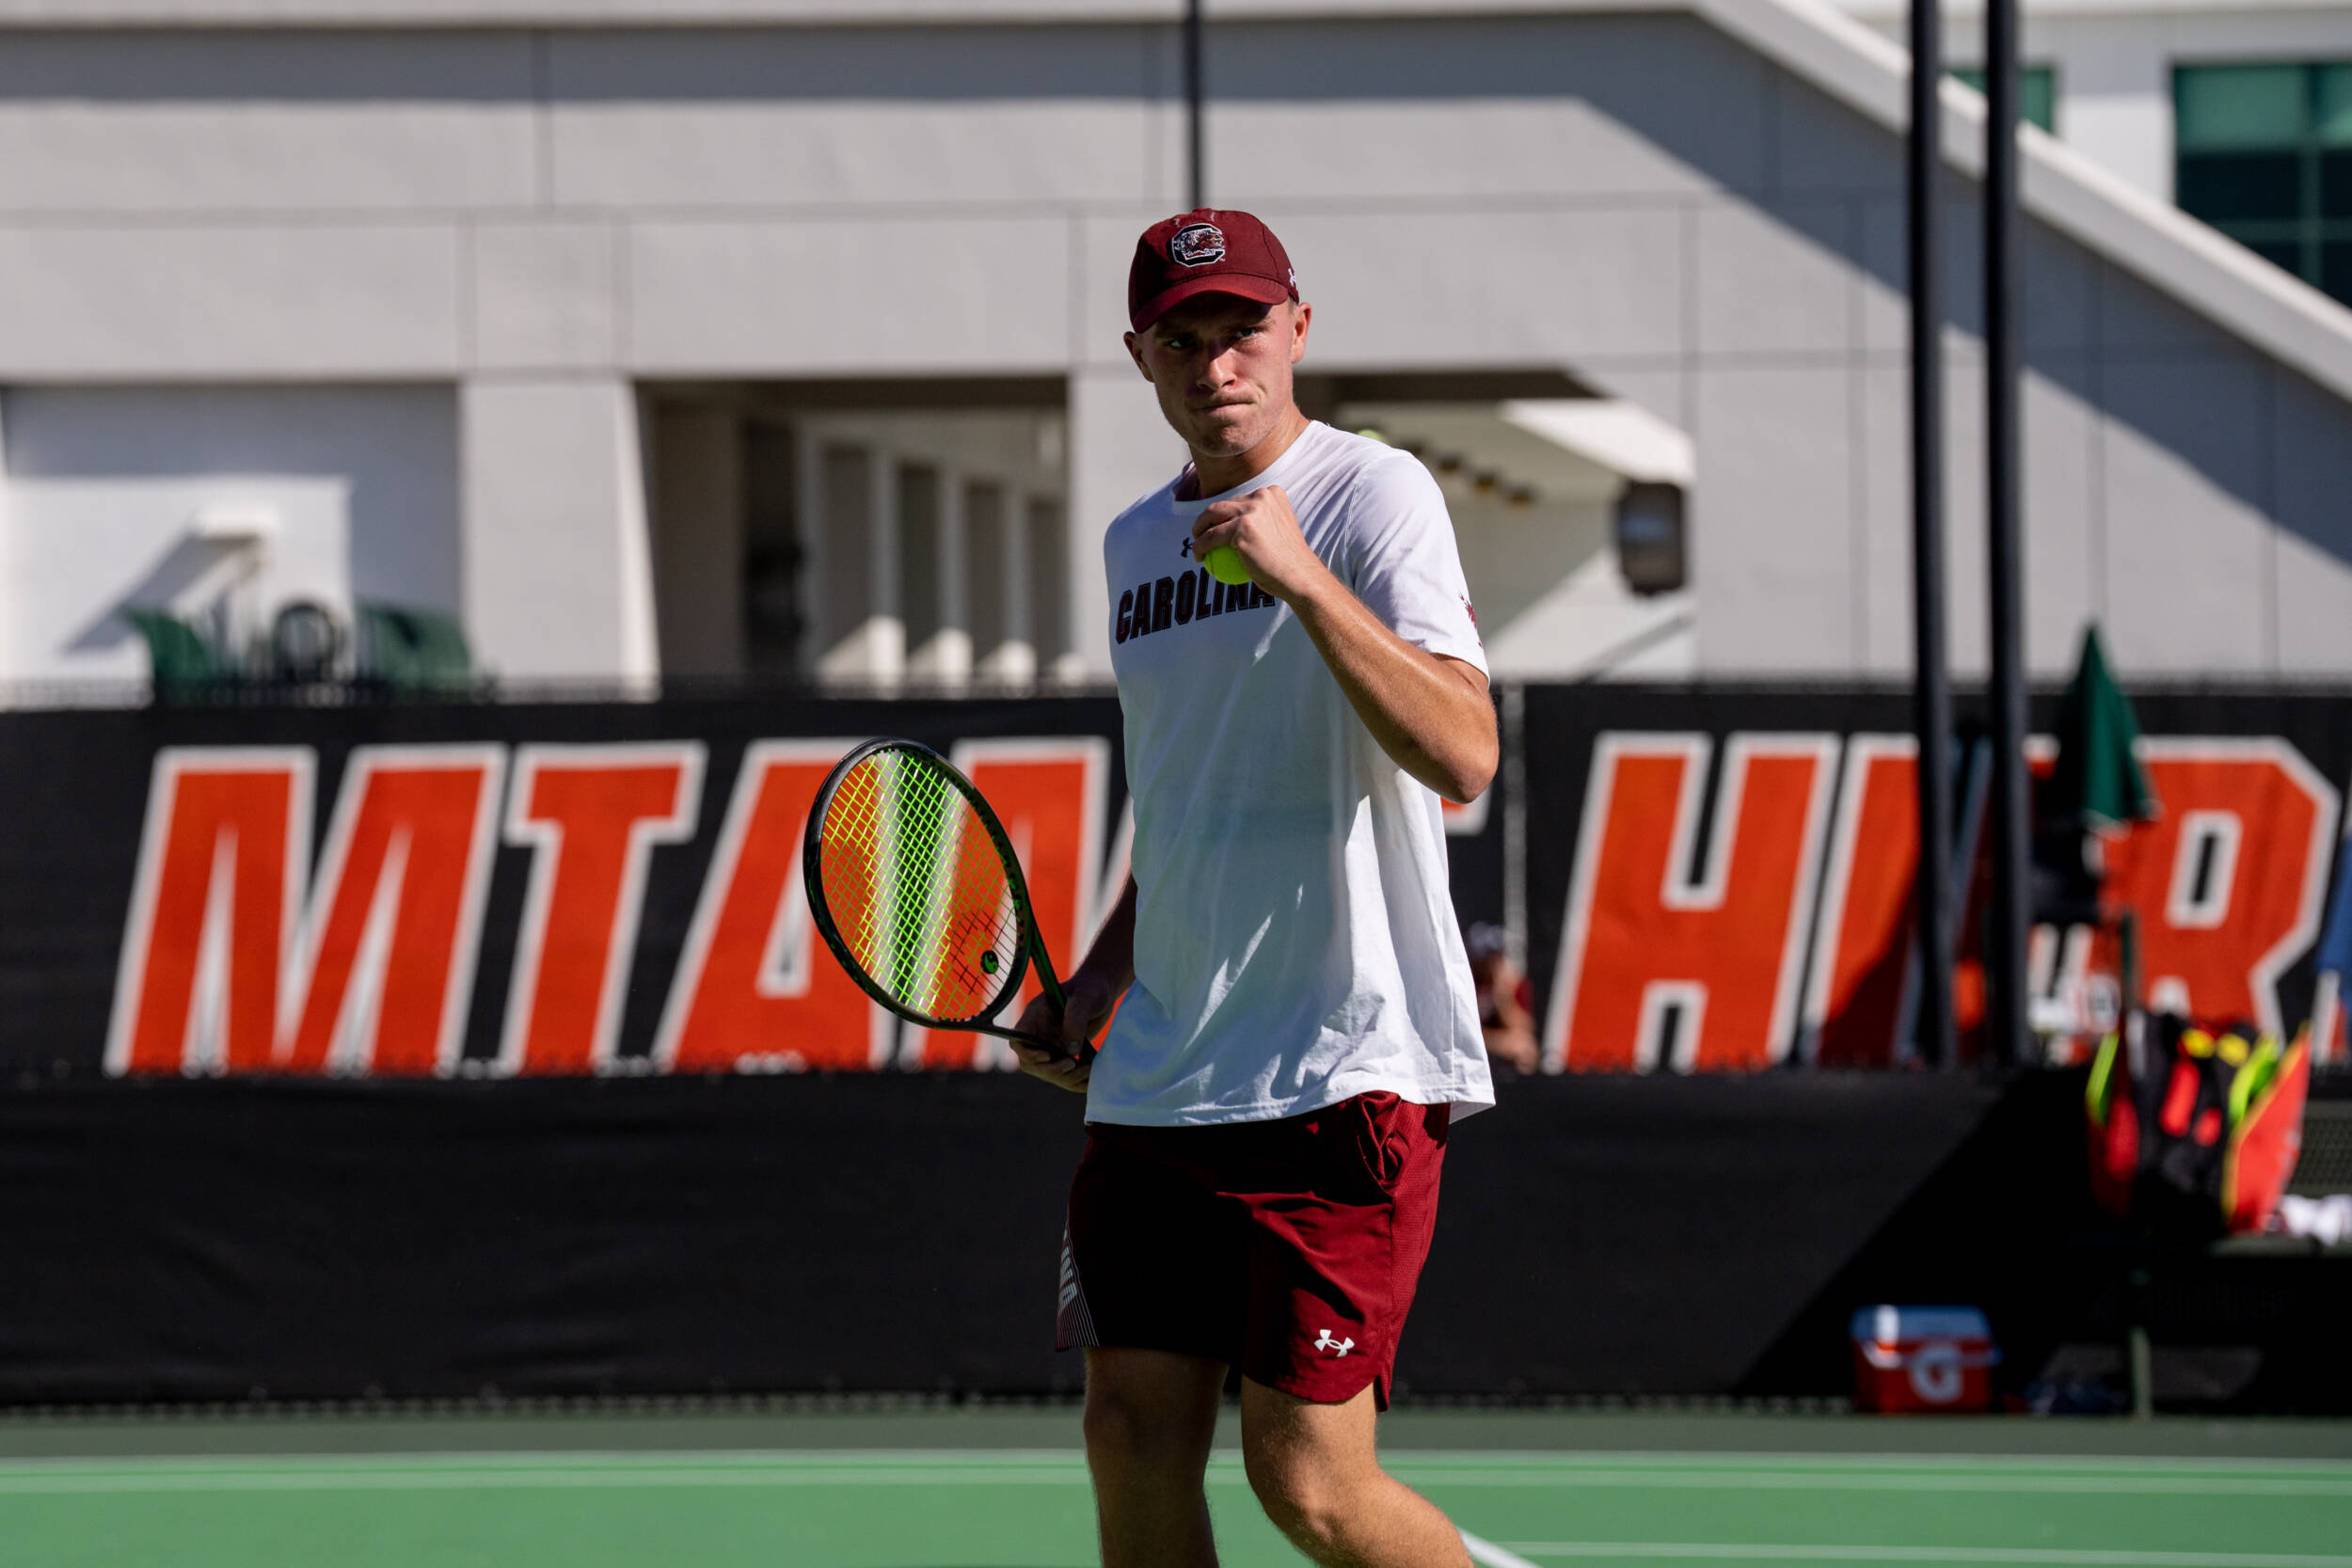 Gamecocks Have Successful Final Day of Spring Invite